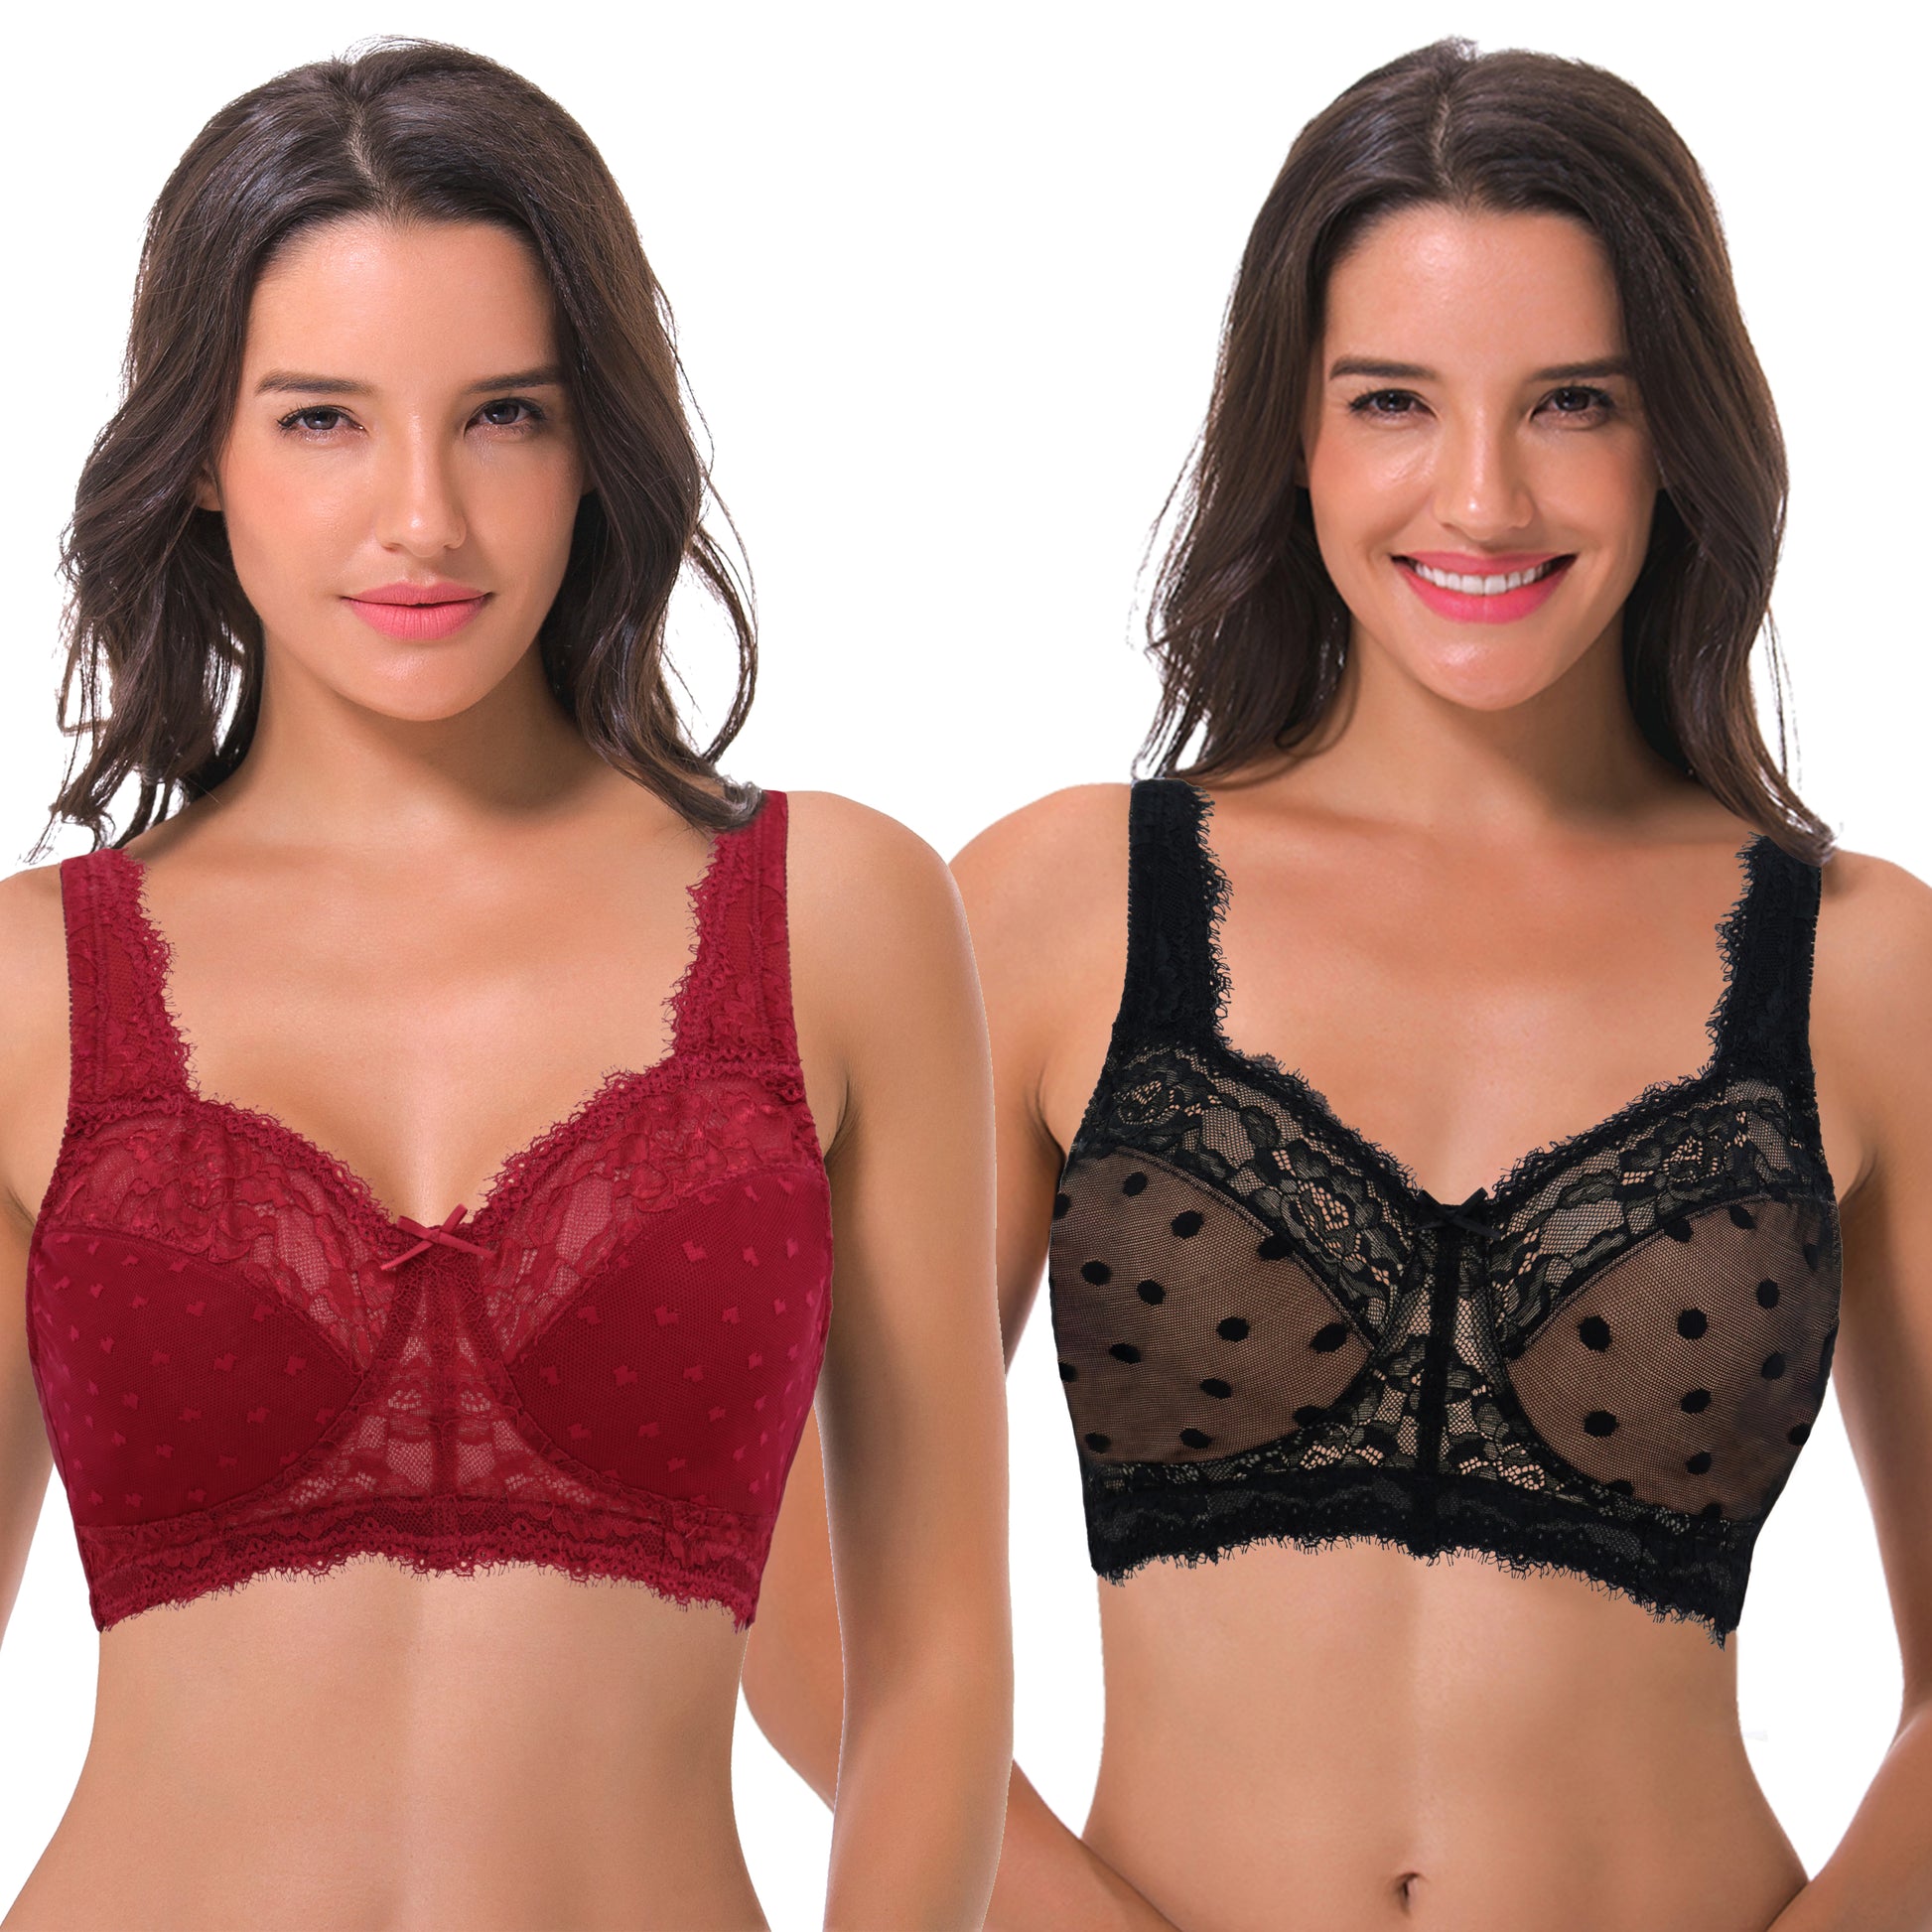 Curve Muse Women's Plus Size Unlined Underwire Lace Bra with Cushion  Straps-2PK